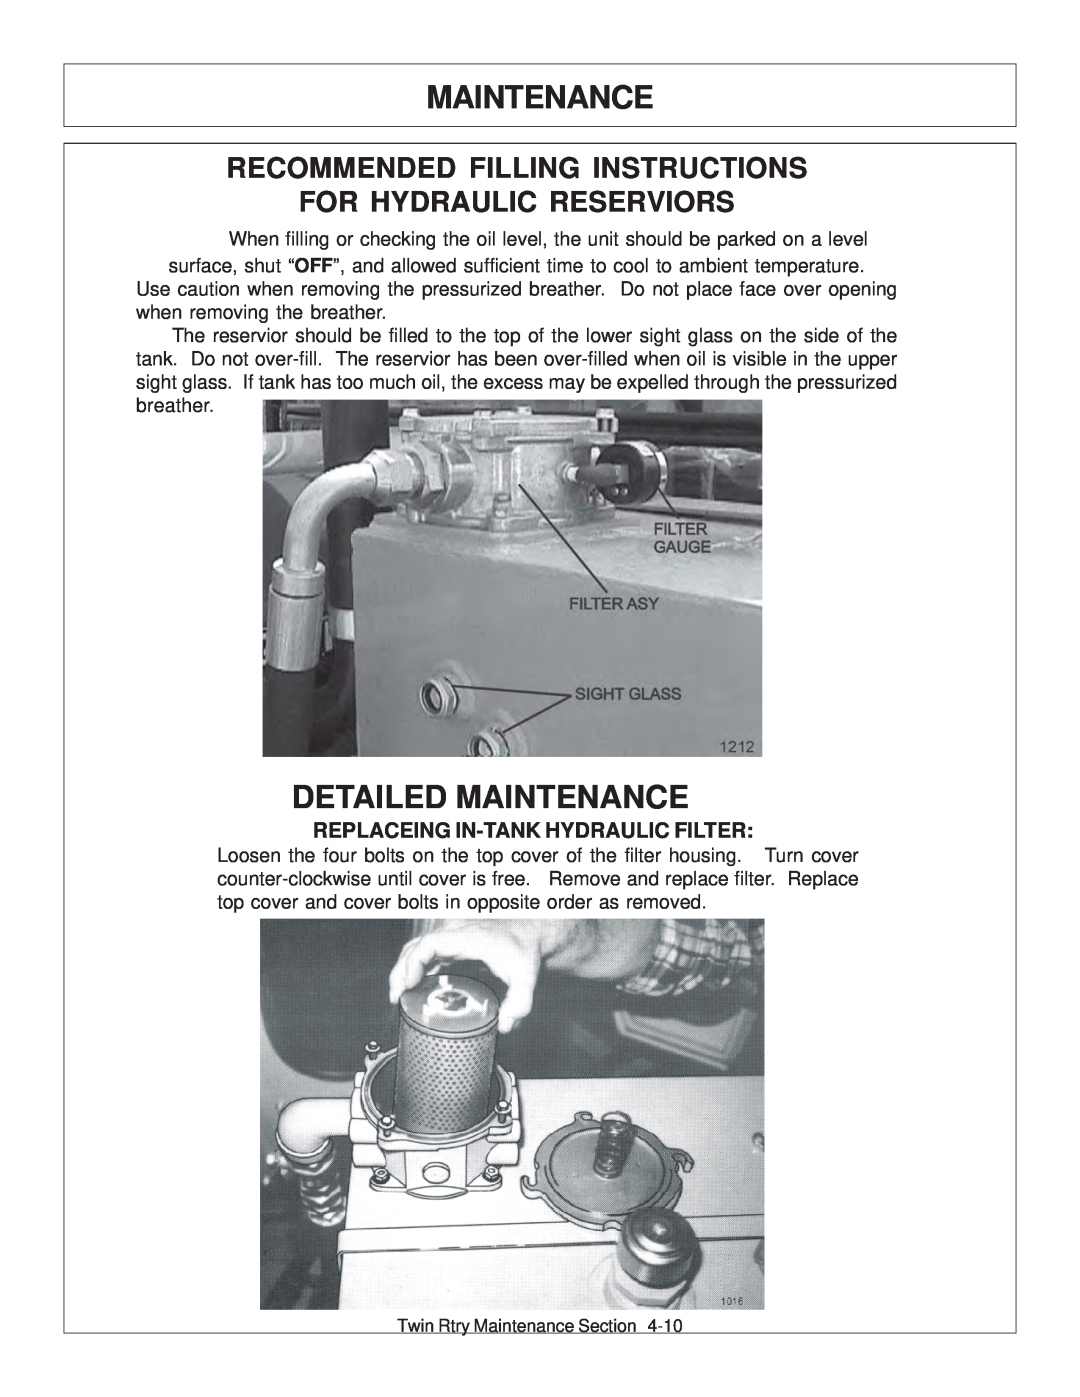 Tiger Products Co., Ltd 6020009 manual Detailed Maintenance, Recommended Filling Instructions For Hydraulic Reserviors 